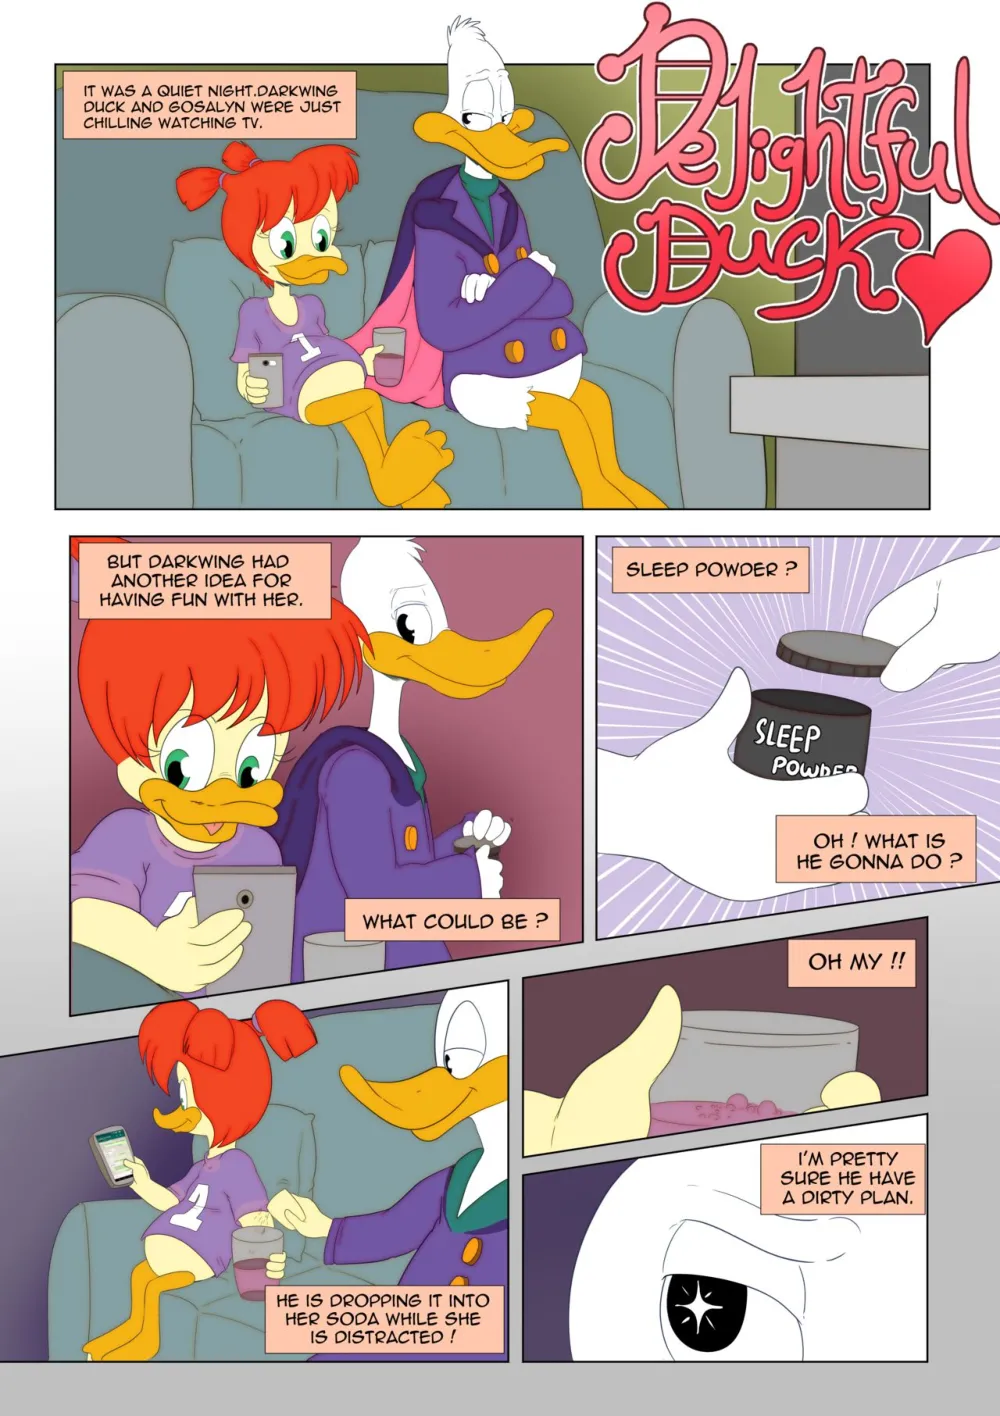 Delightful Duck - Page 1